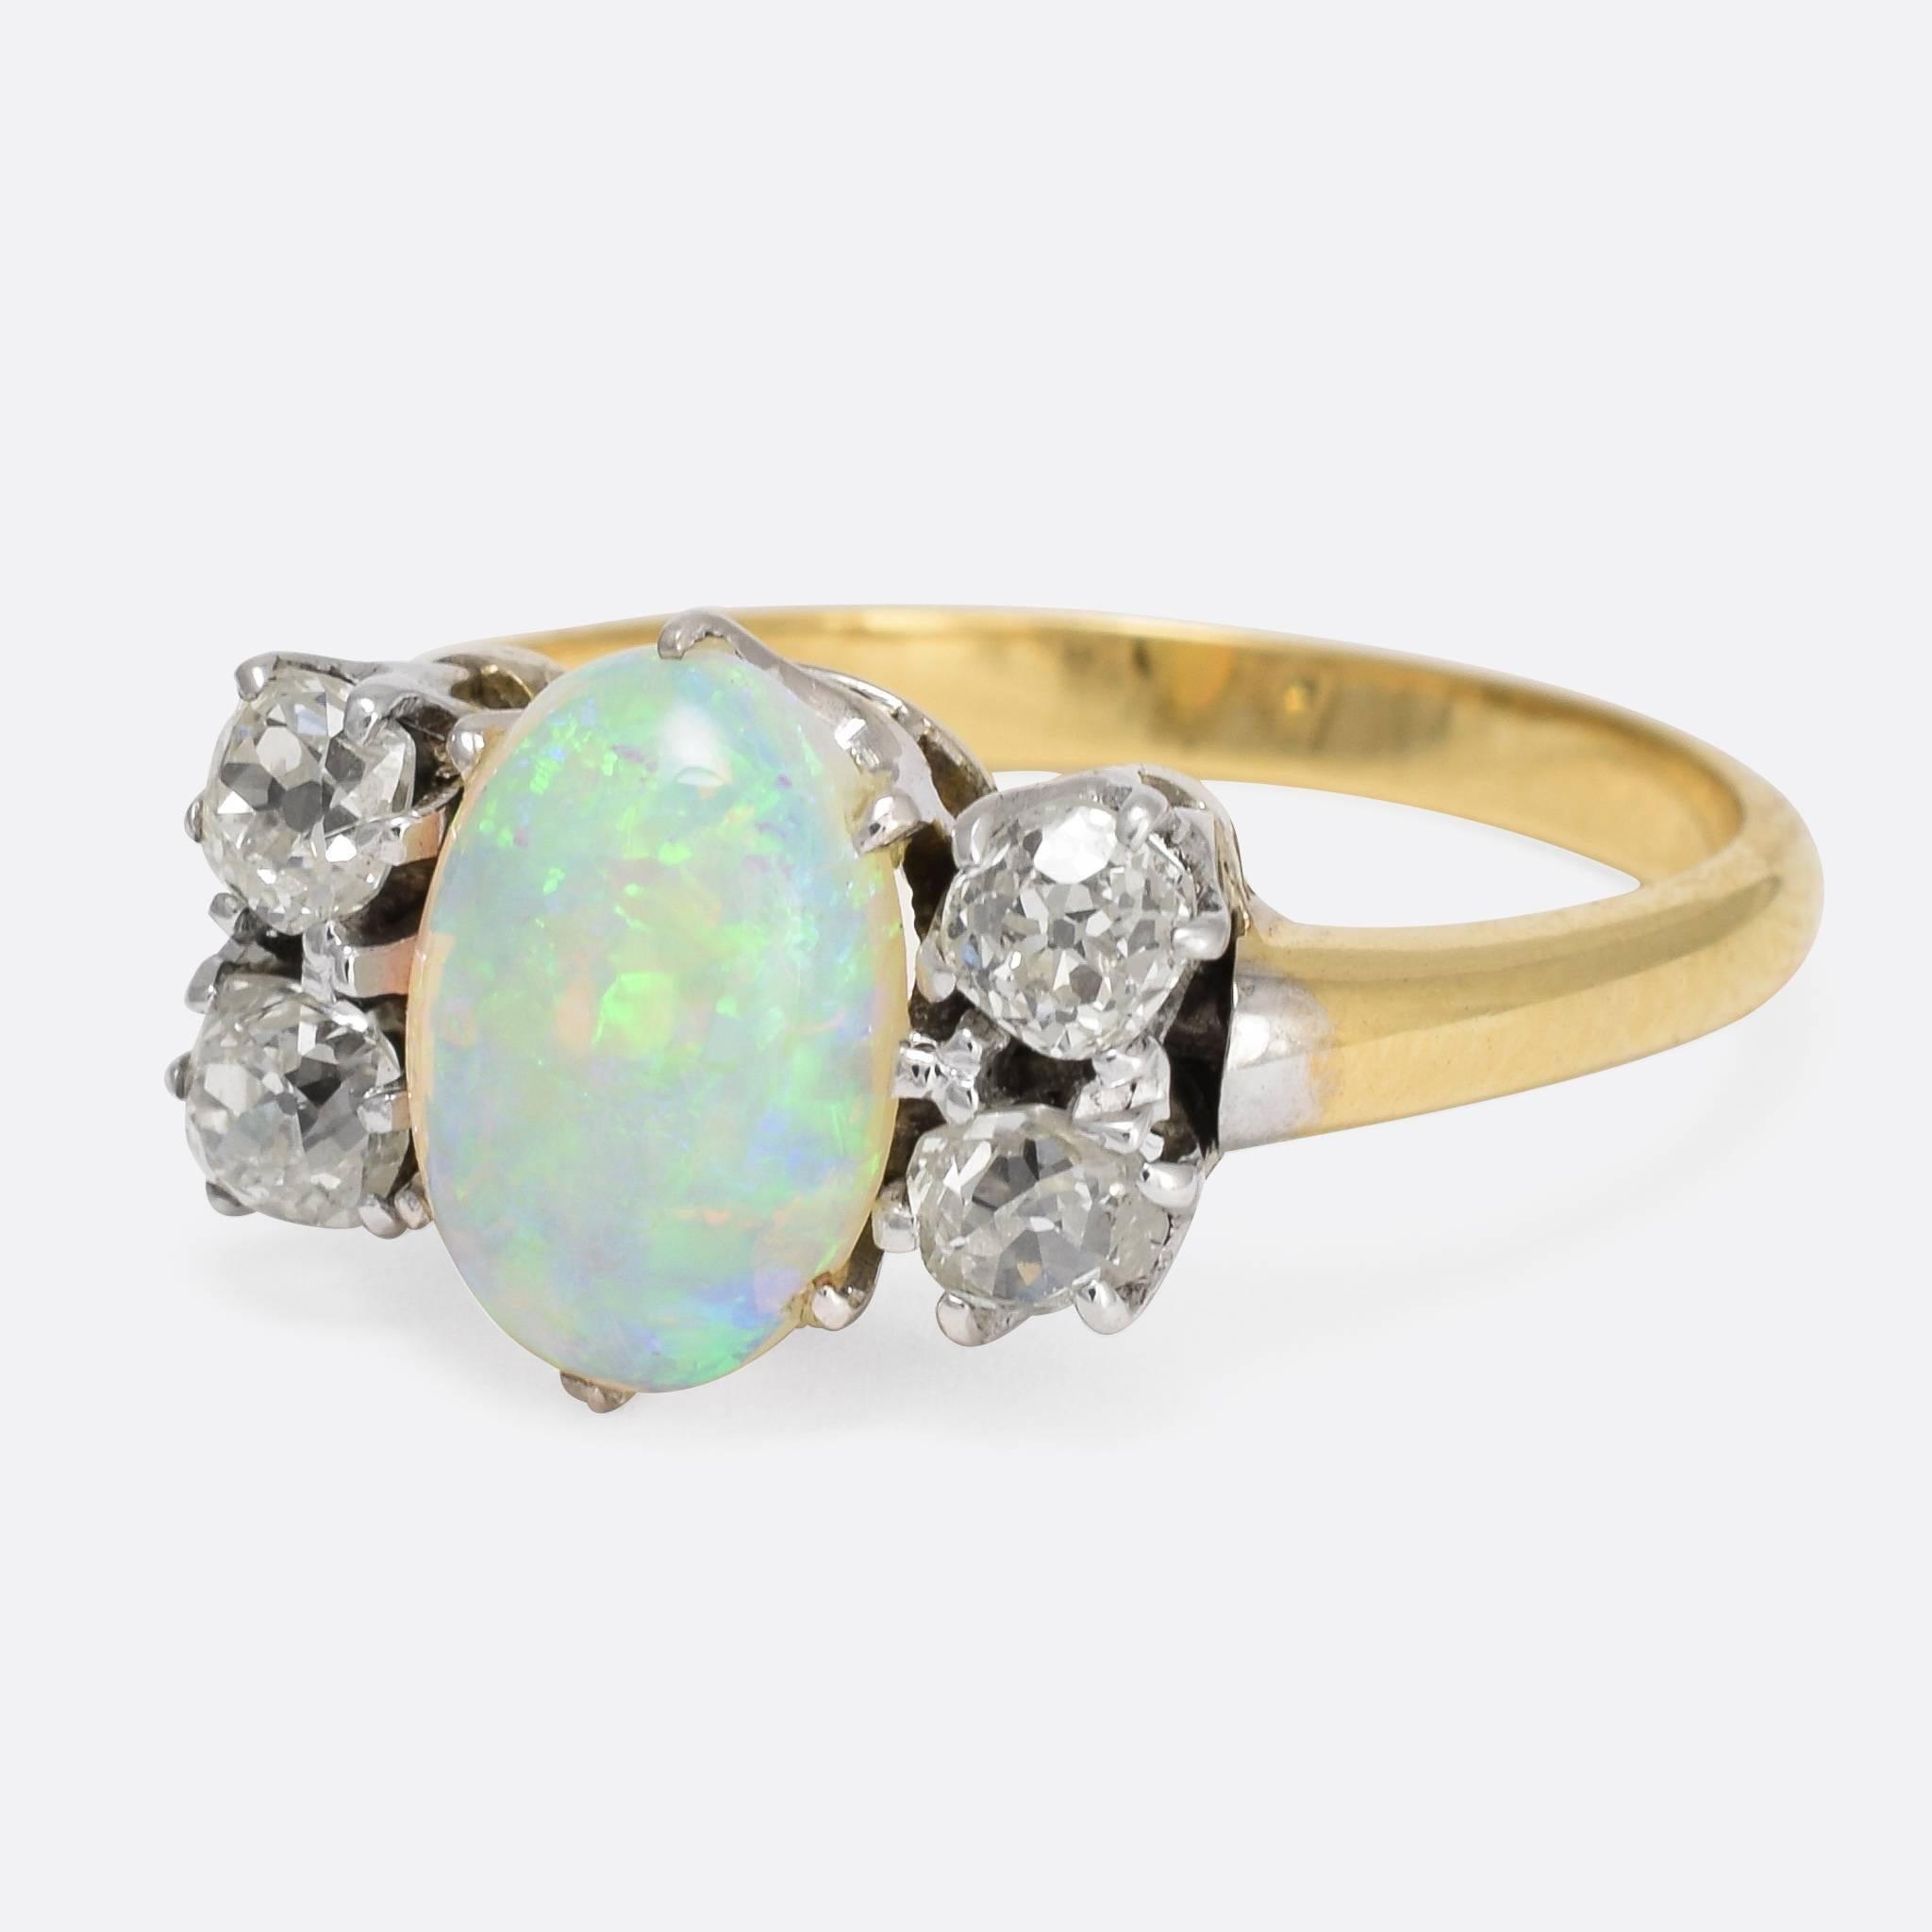 This unusual antique ring is set with a vibrant opal cabochon, flanked by two square cushion cut diamonds on either side. The stones are arranged very slightly offset from centre – held in platinum claw mounts. The simple band is modelled in 18k